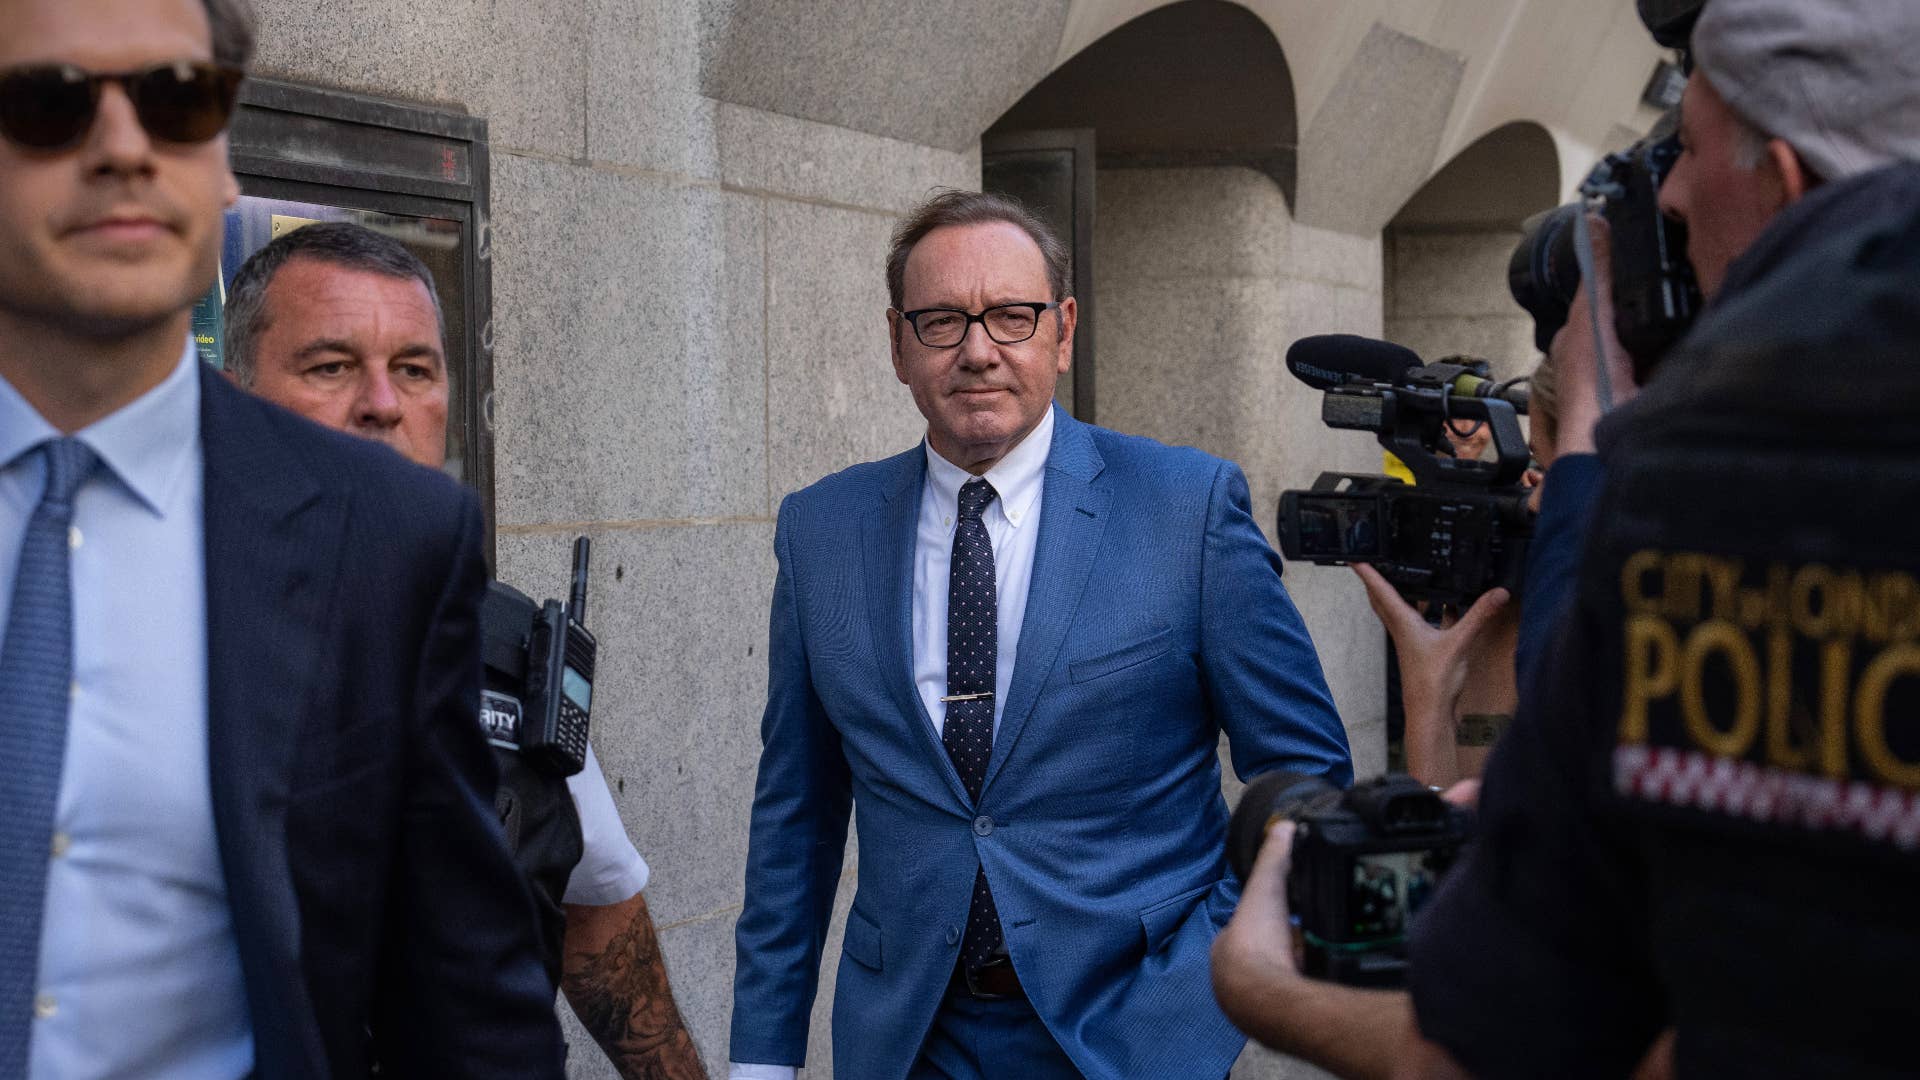 Kevin Spacey is seen at a court hearing